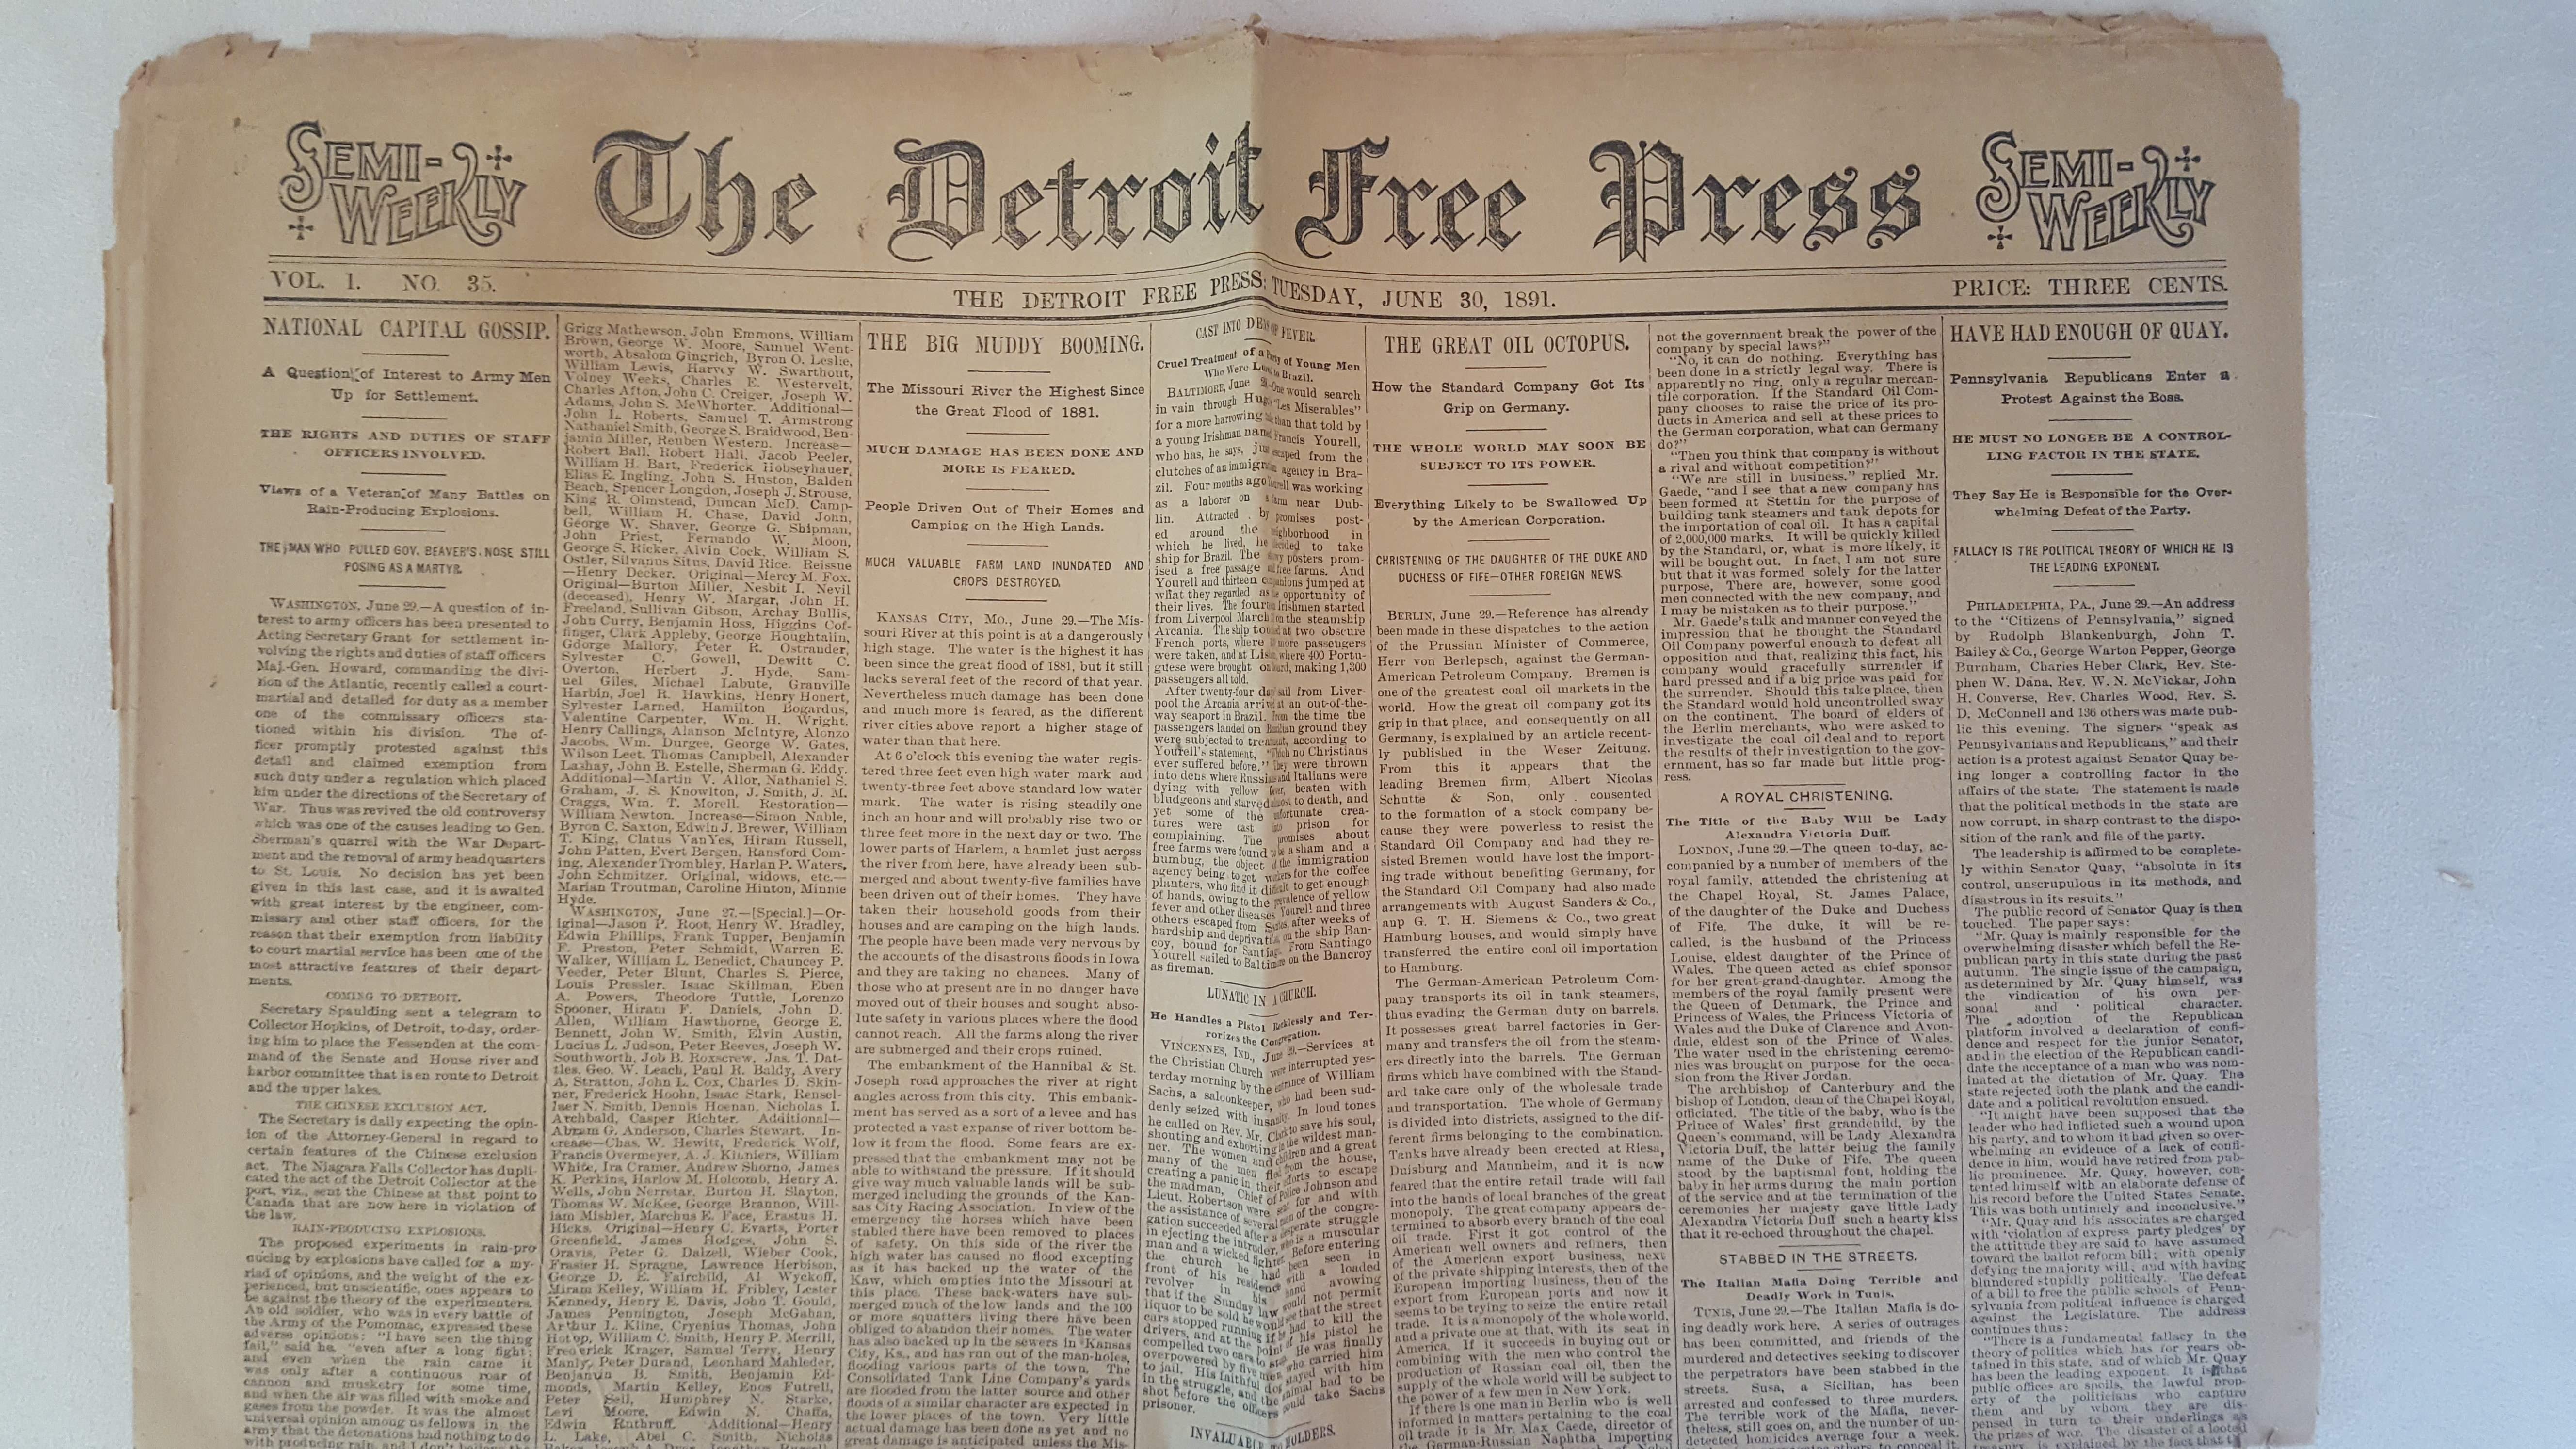 "The legitimately oldest paper in the box - 1891."